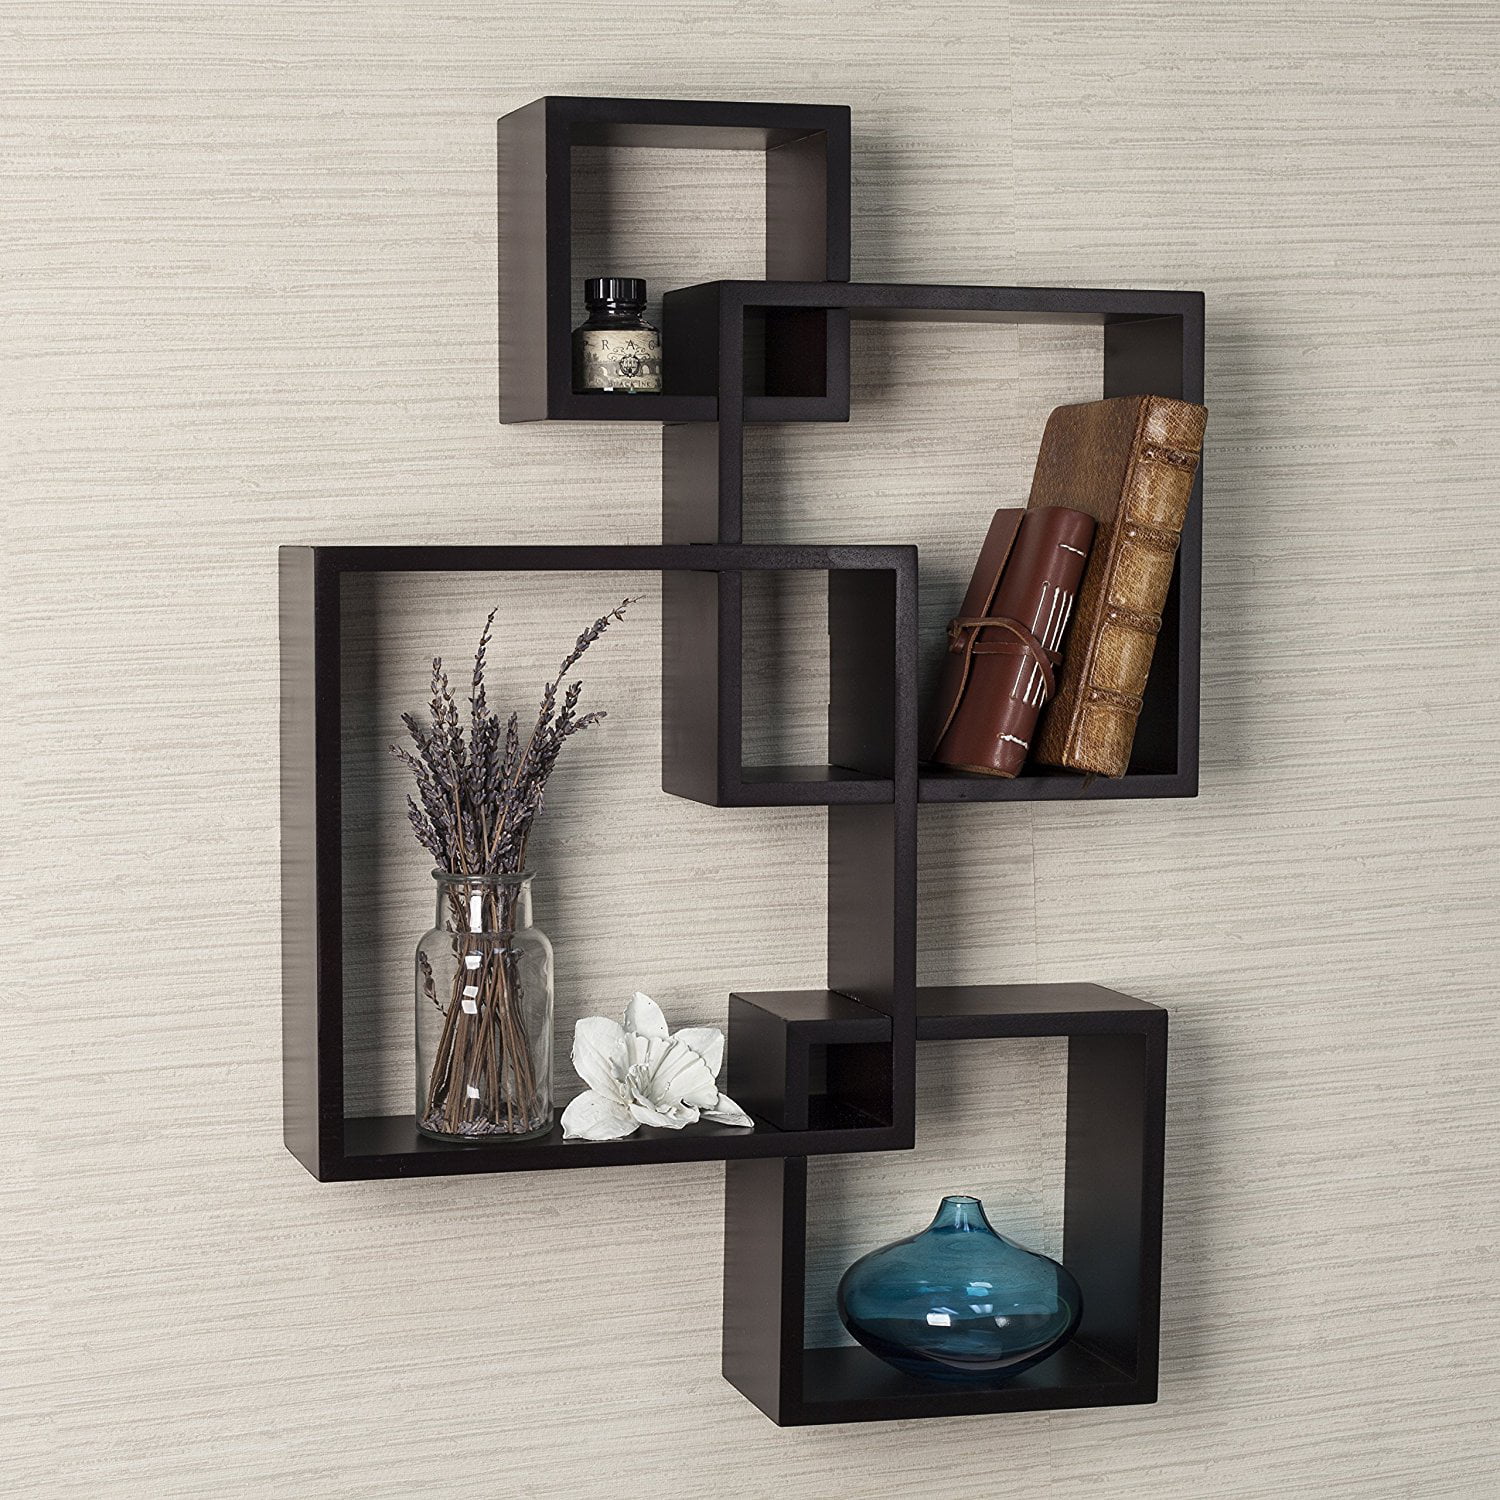 Details about   Wall Mounted Storage Bracket Floating Shelf Home Decor Ornament Living Room US 